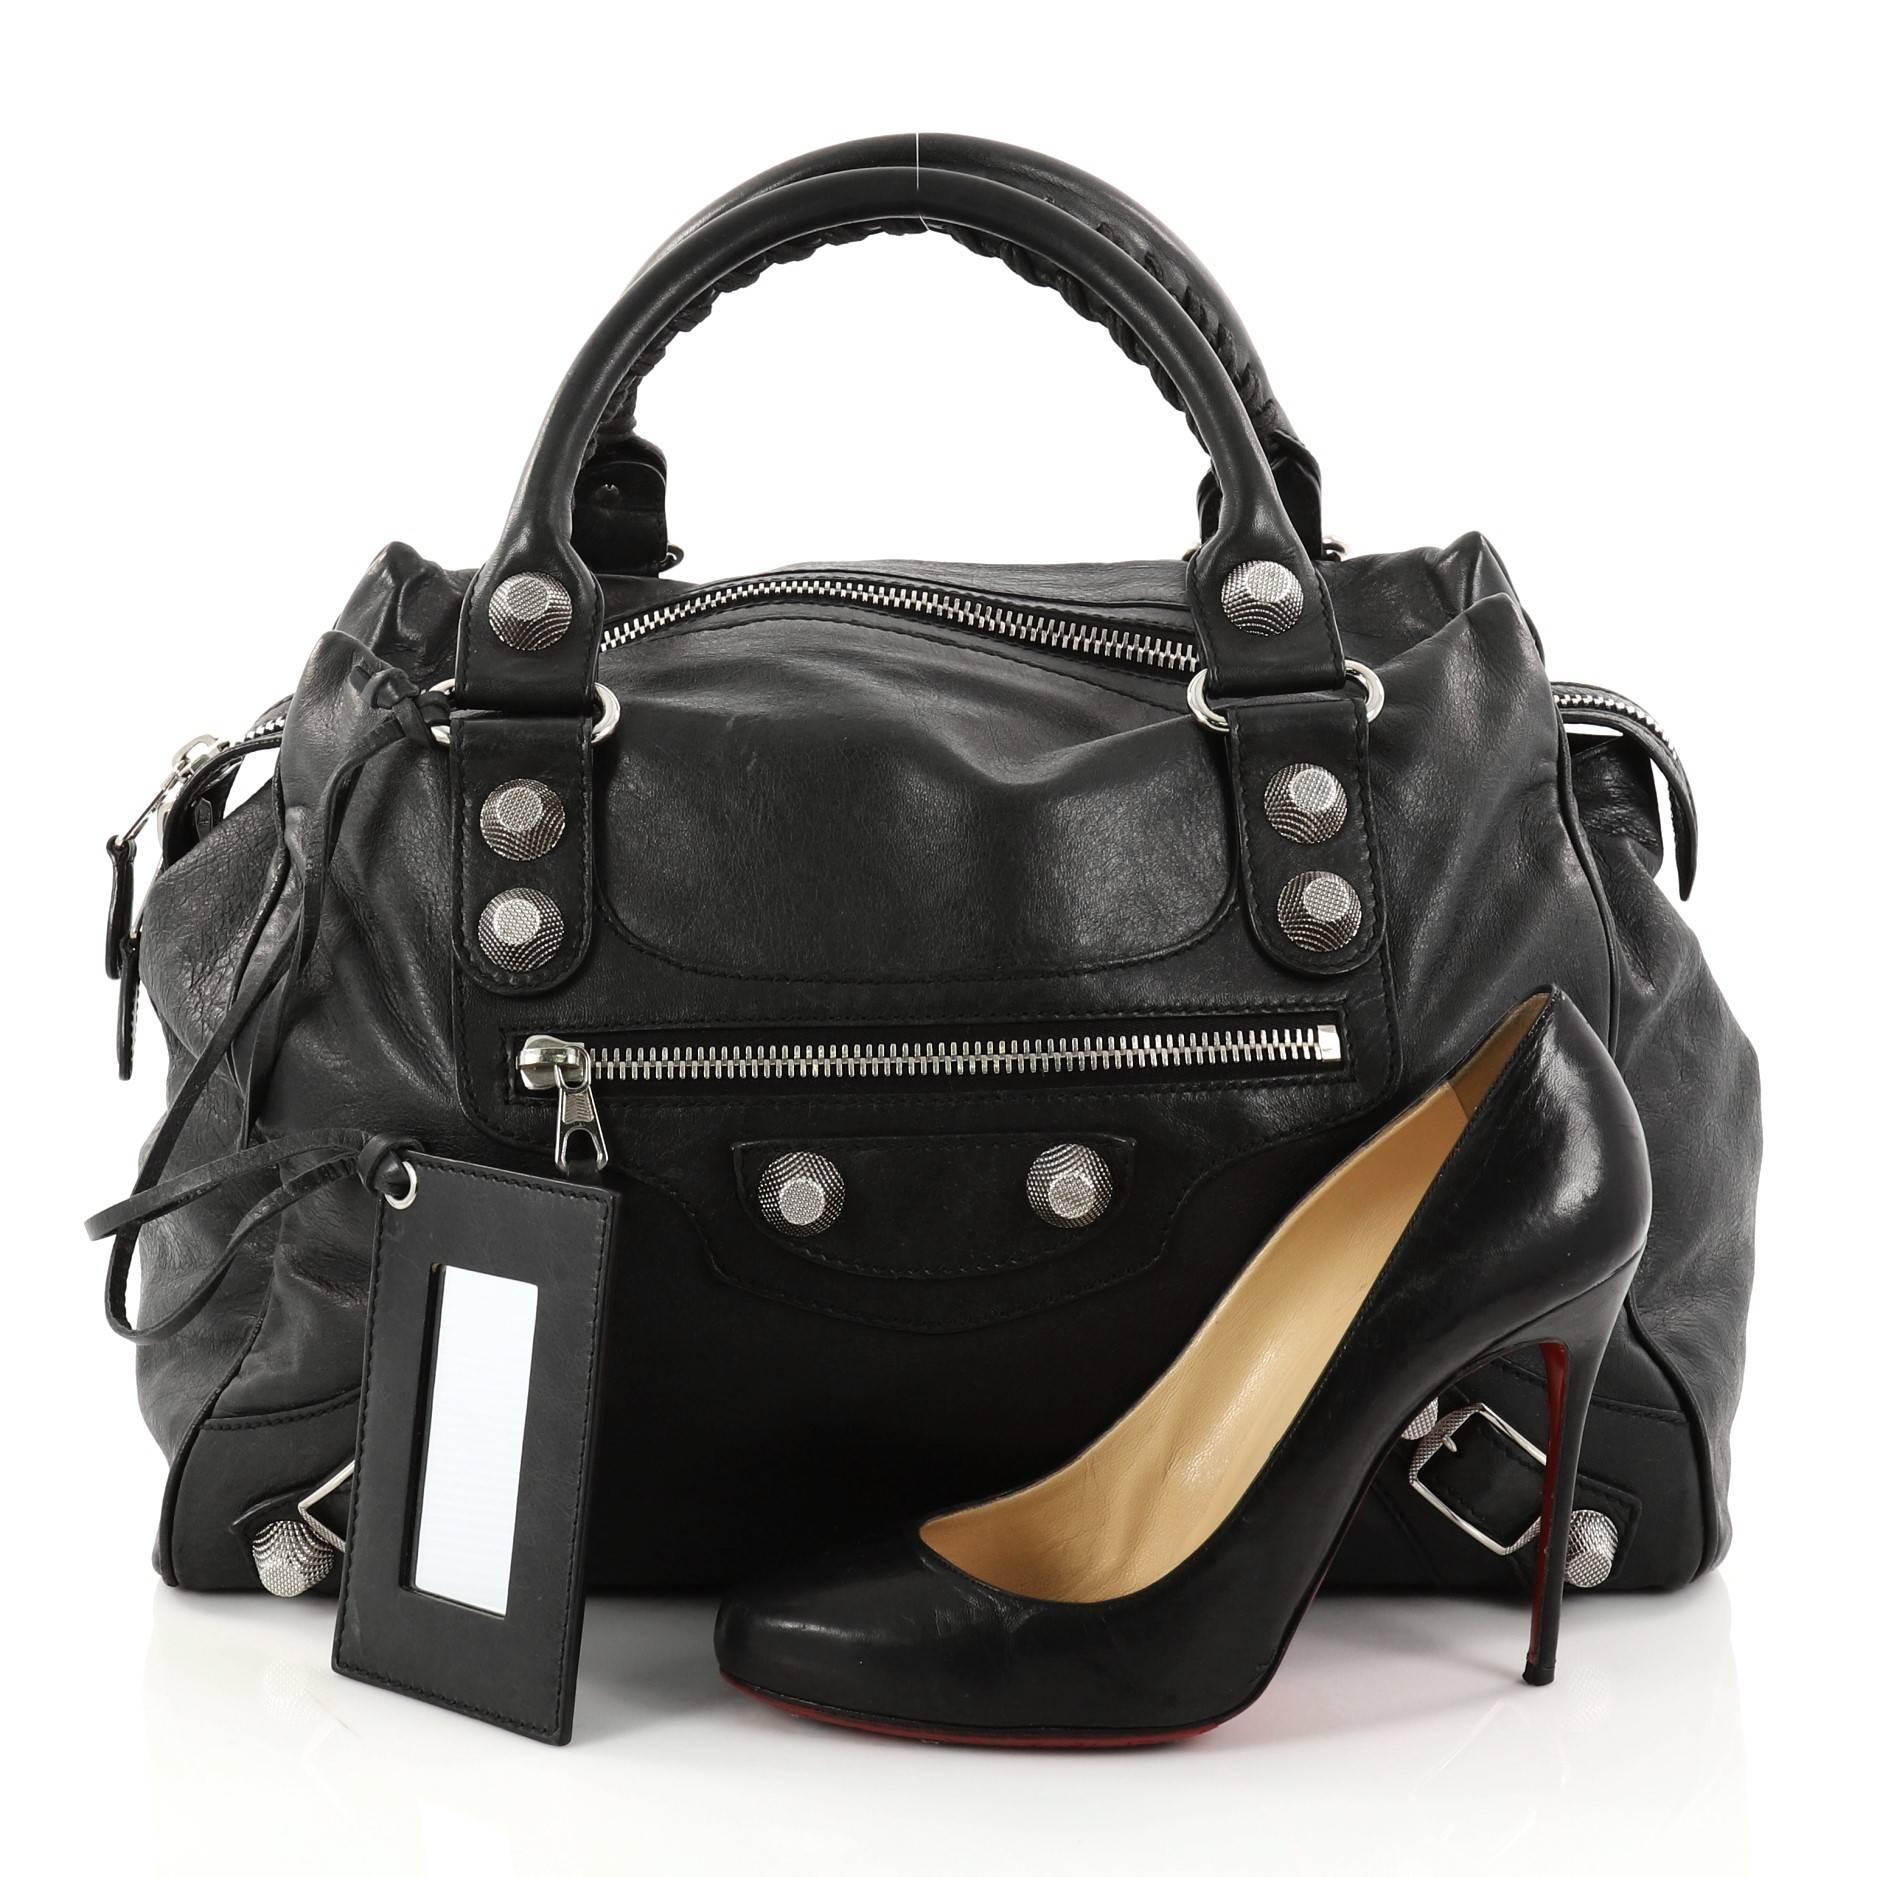 This authentic Balenciaga Midday Giant Studs Handbag Leather is perfect for on-the-go moments. Crafted from black leather, this modern satchel features dual-rolled braided top handles with whipstitch details, exterior front zip pocket, Balenciaga